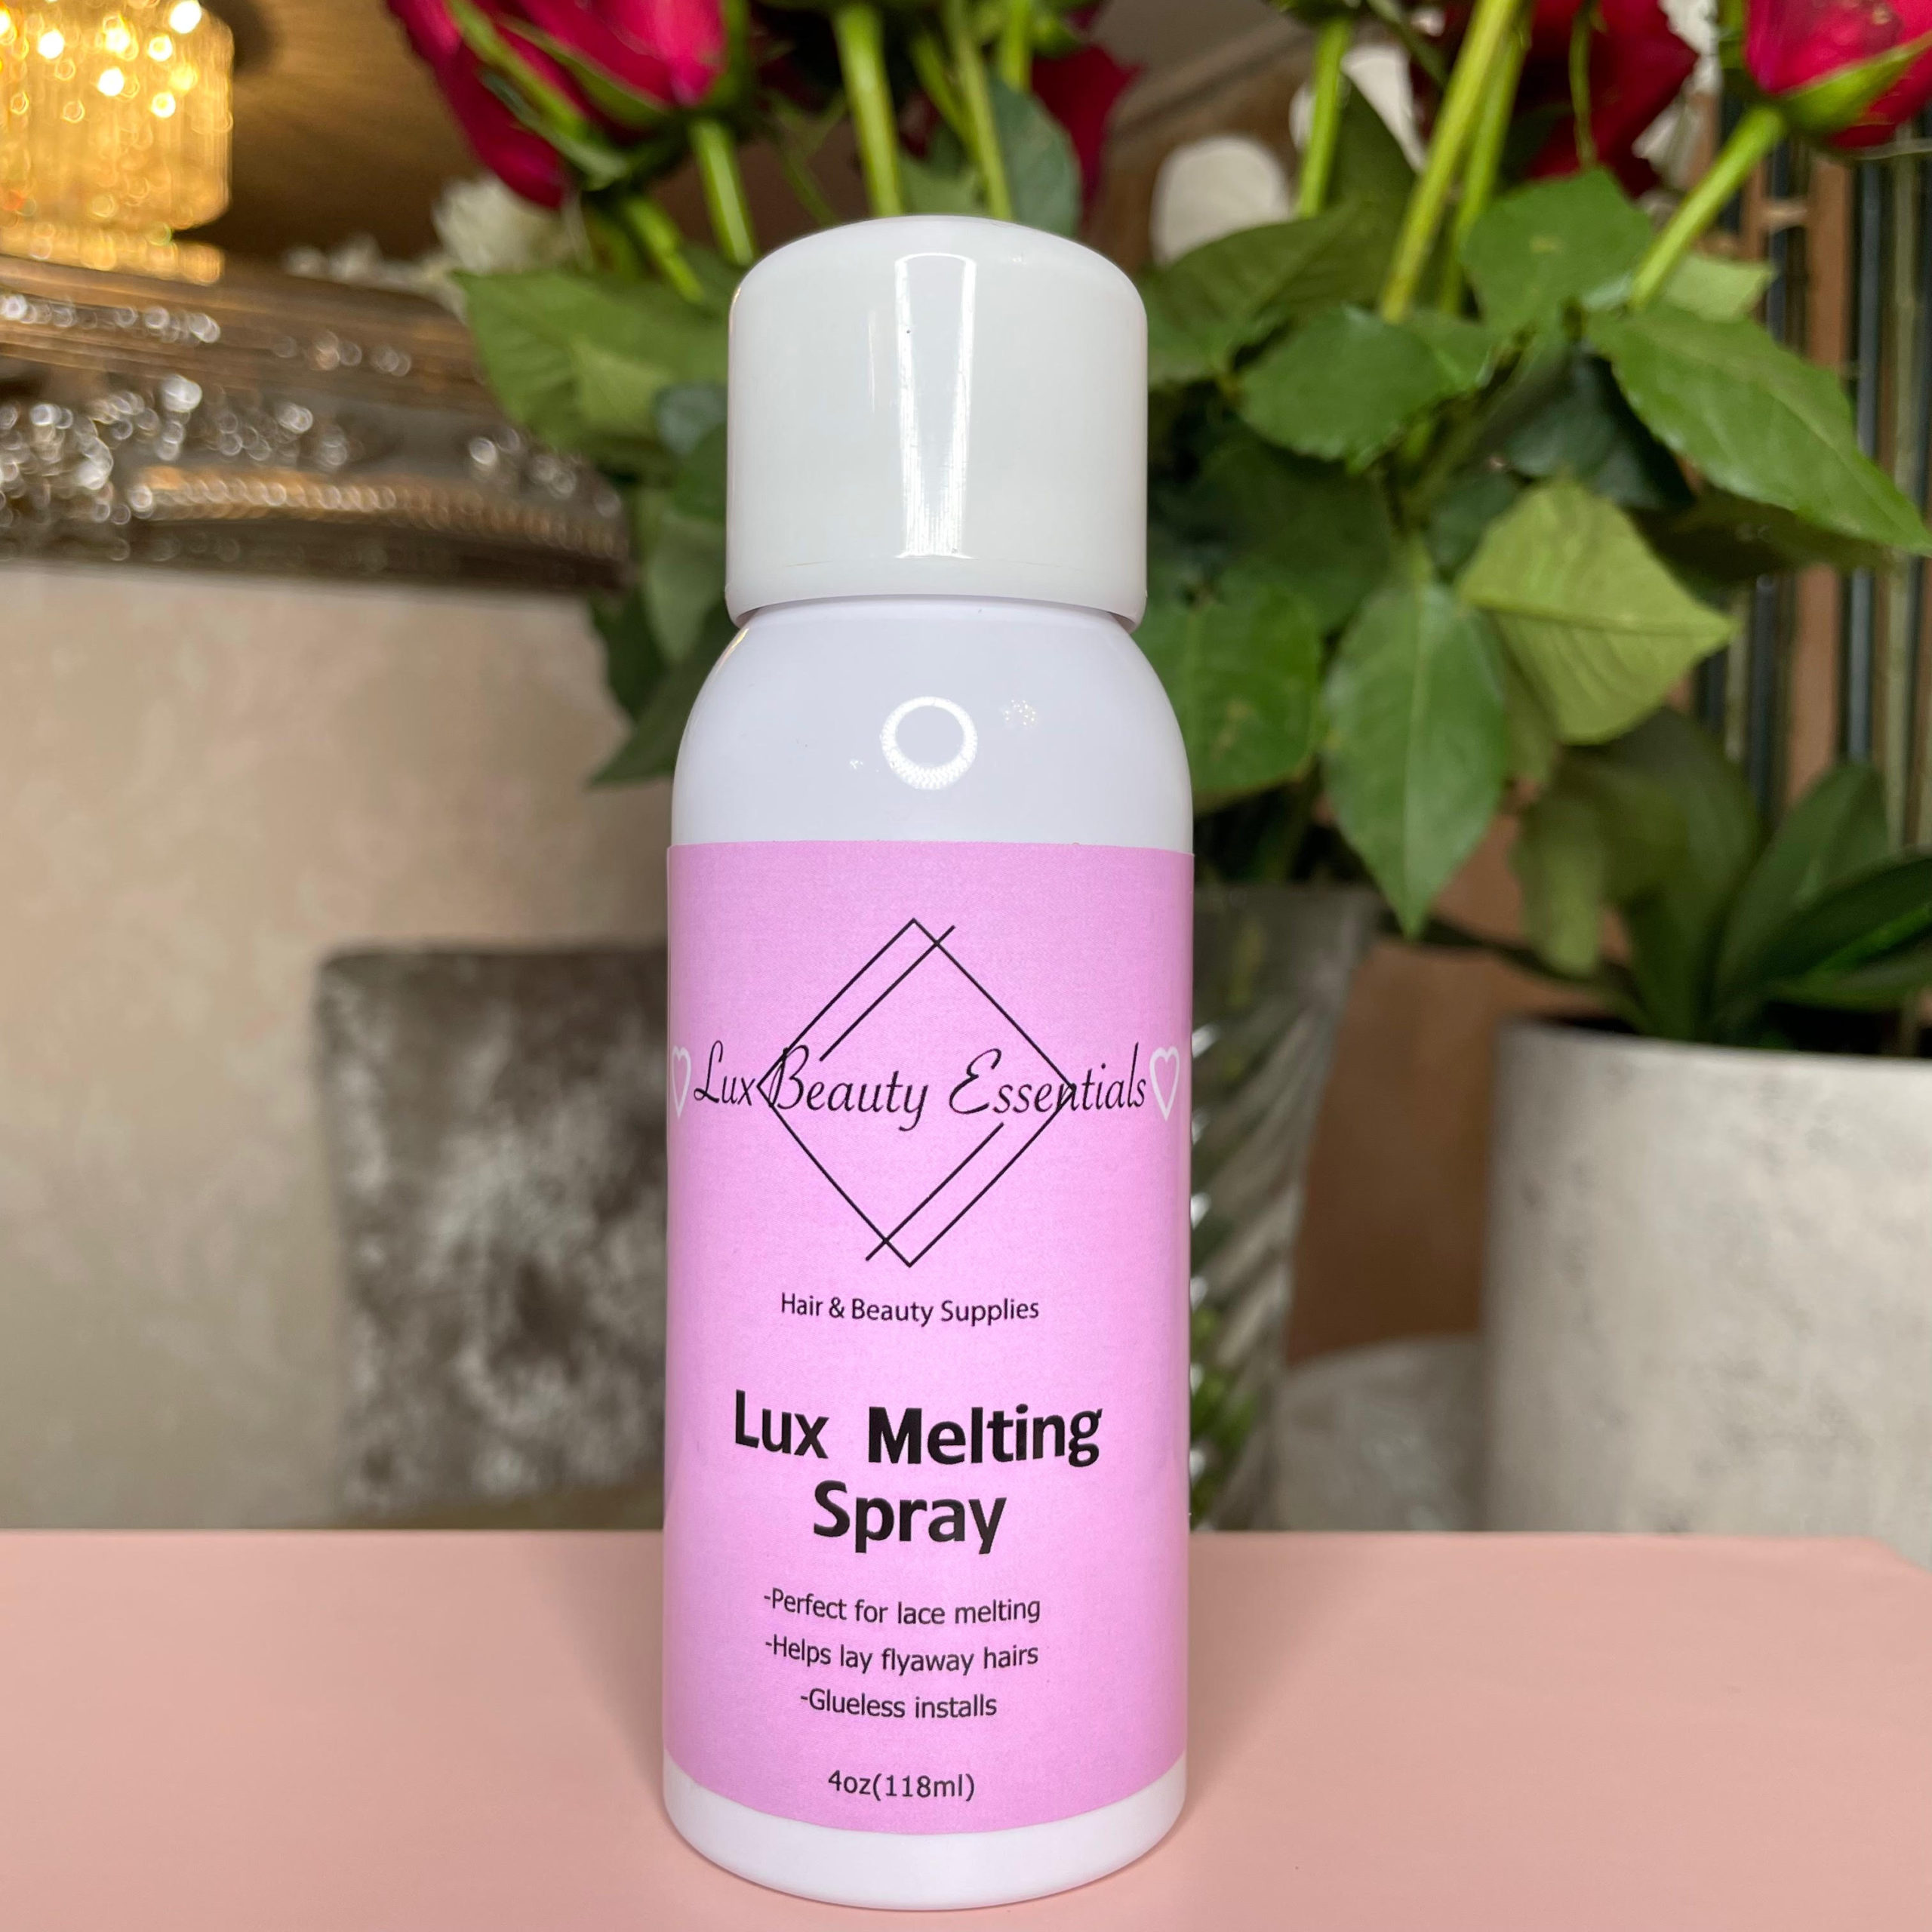 Lux Melting Spray- Melt your lace! - Lux Beauty Essentials